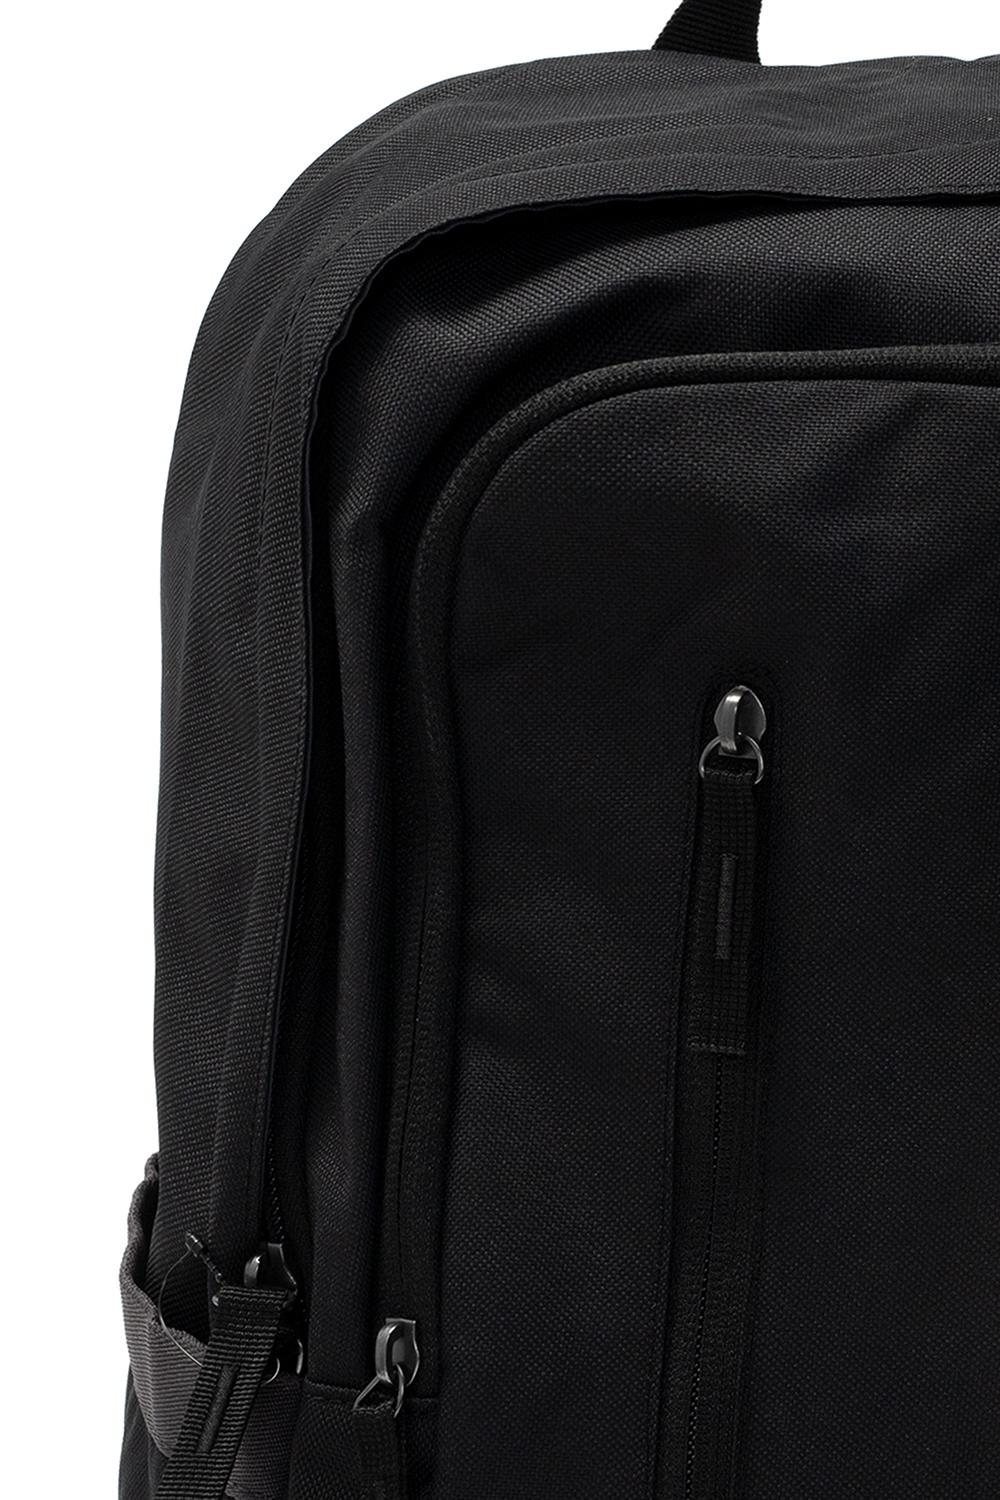 Nike All Access Soleday Backpack in Black | Lyst